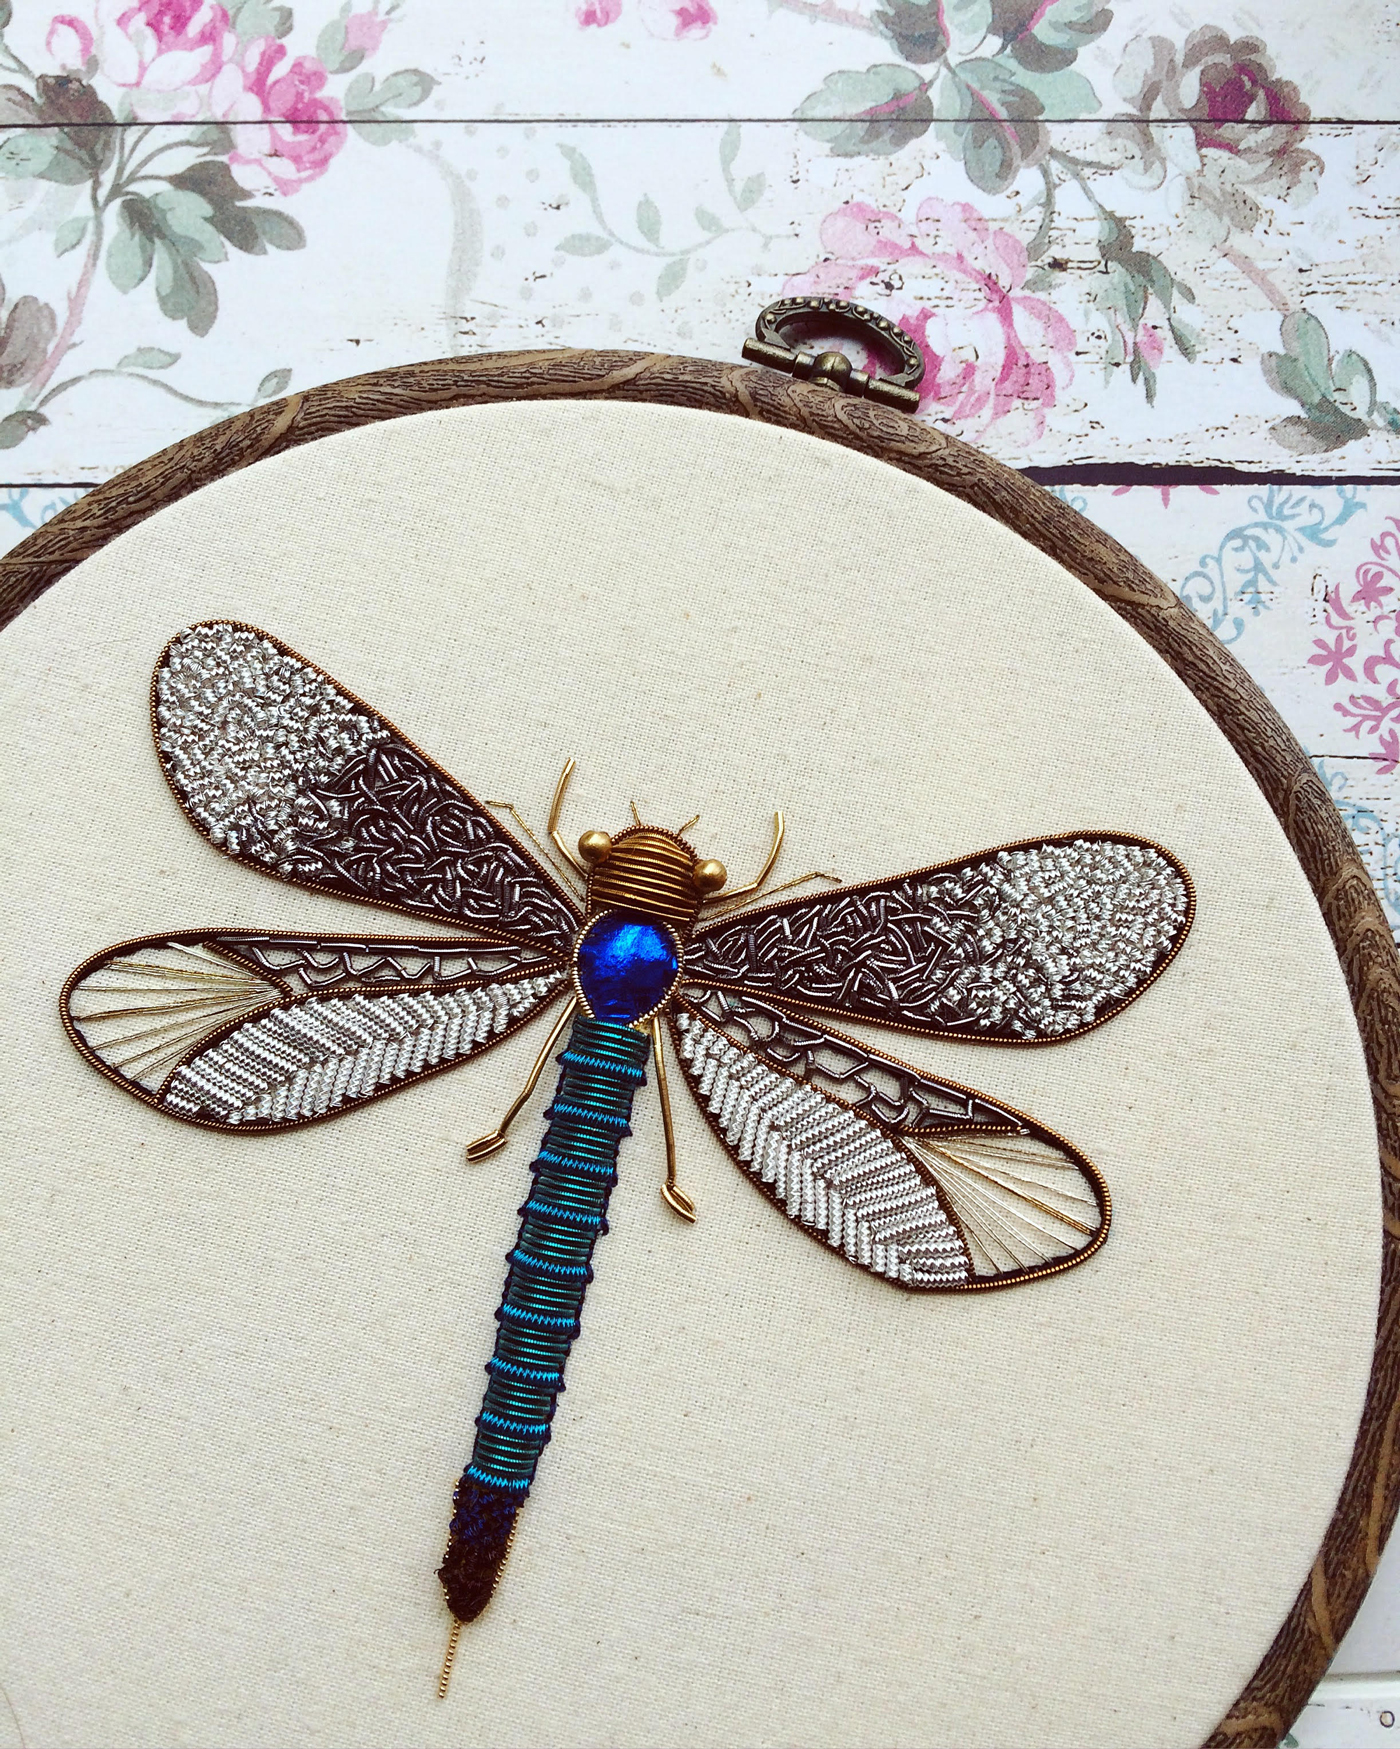 Shimmering Metallic Embroideries of Dragonflies and Other Insects by ...